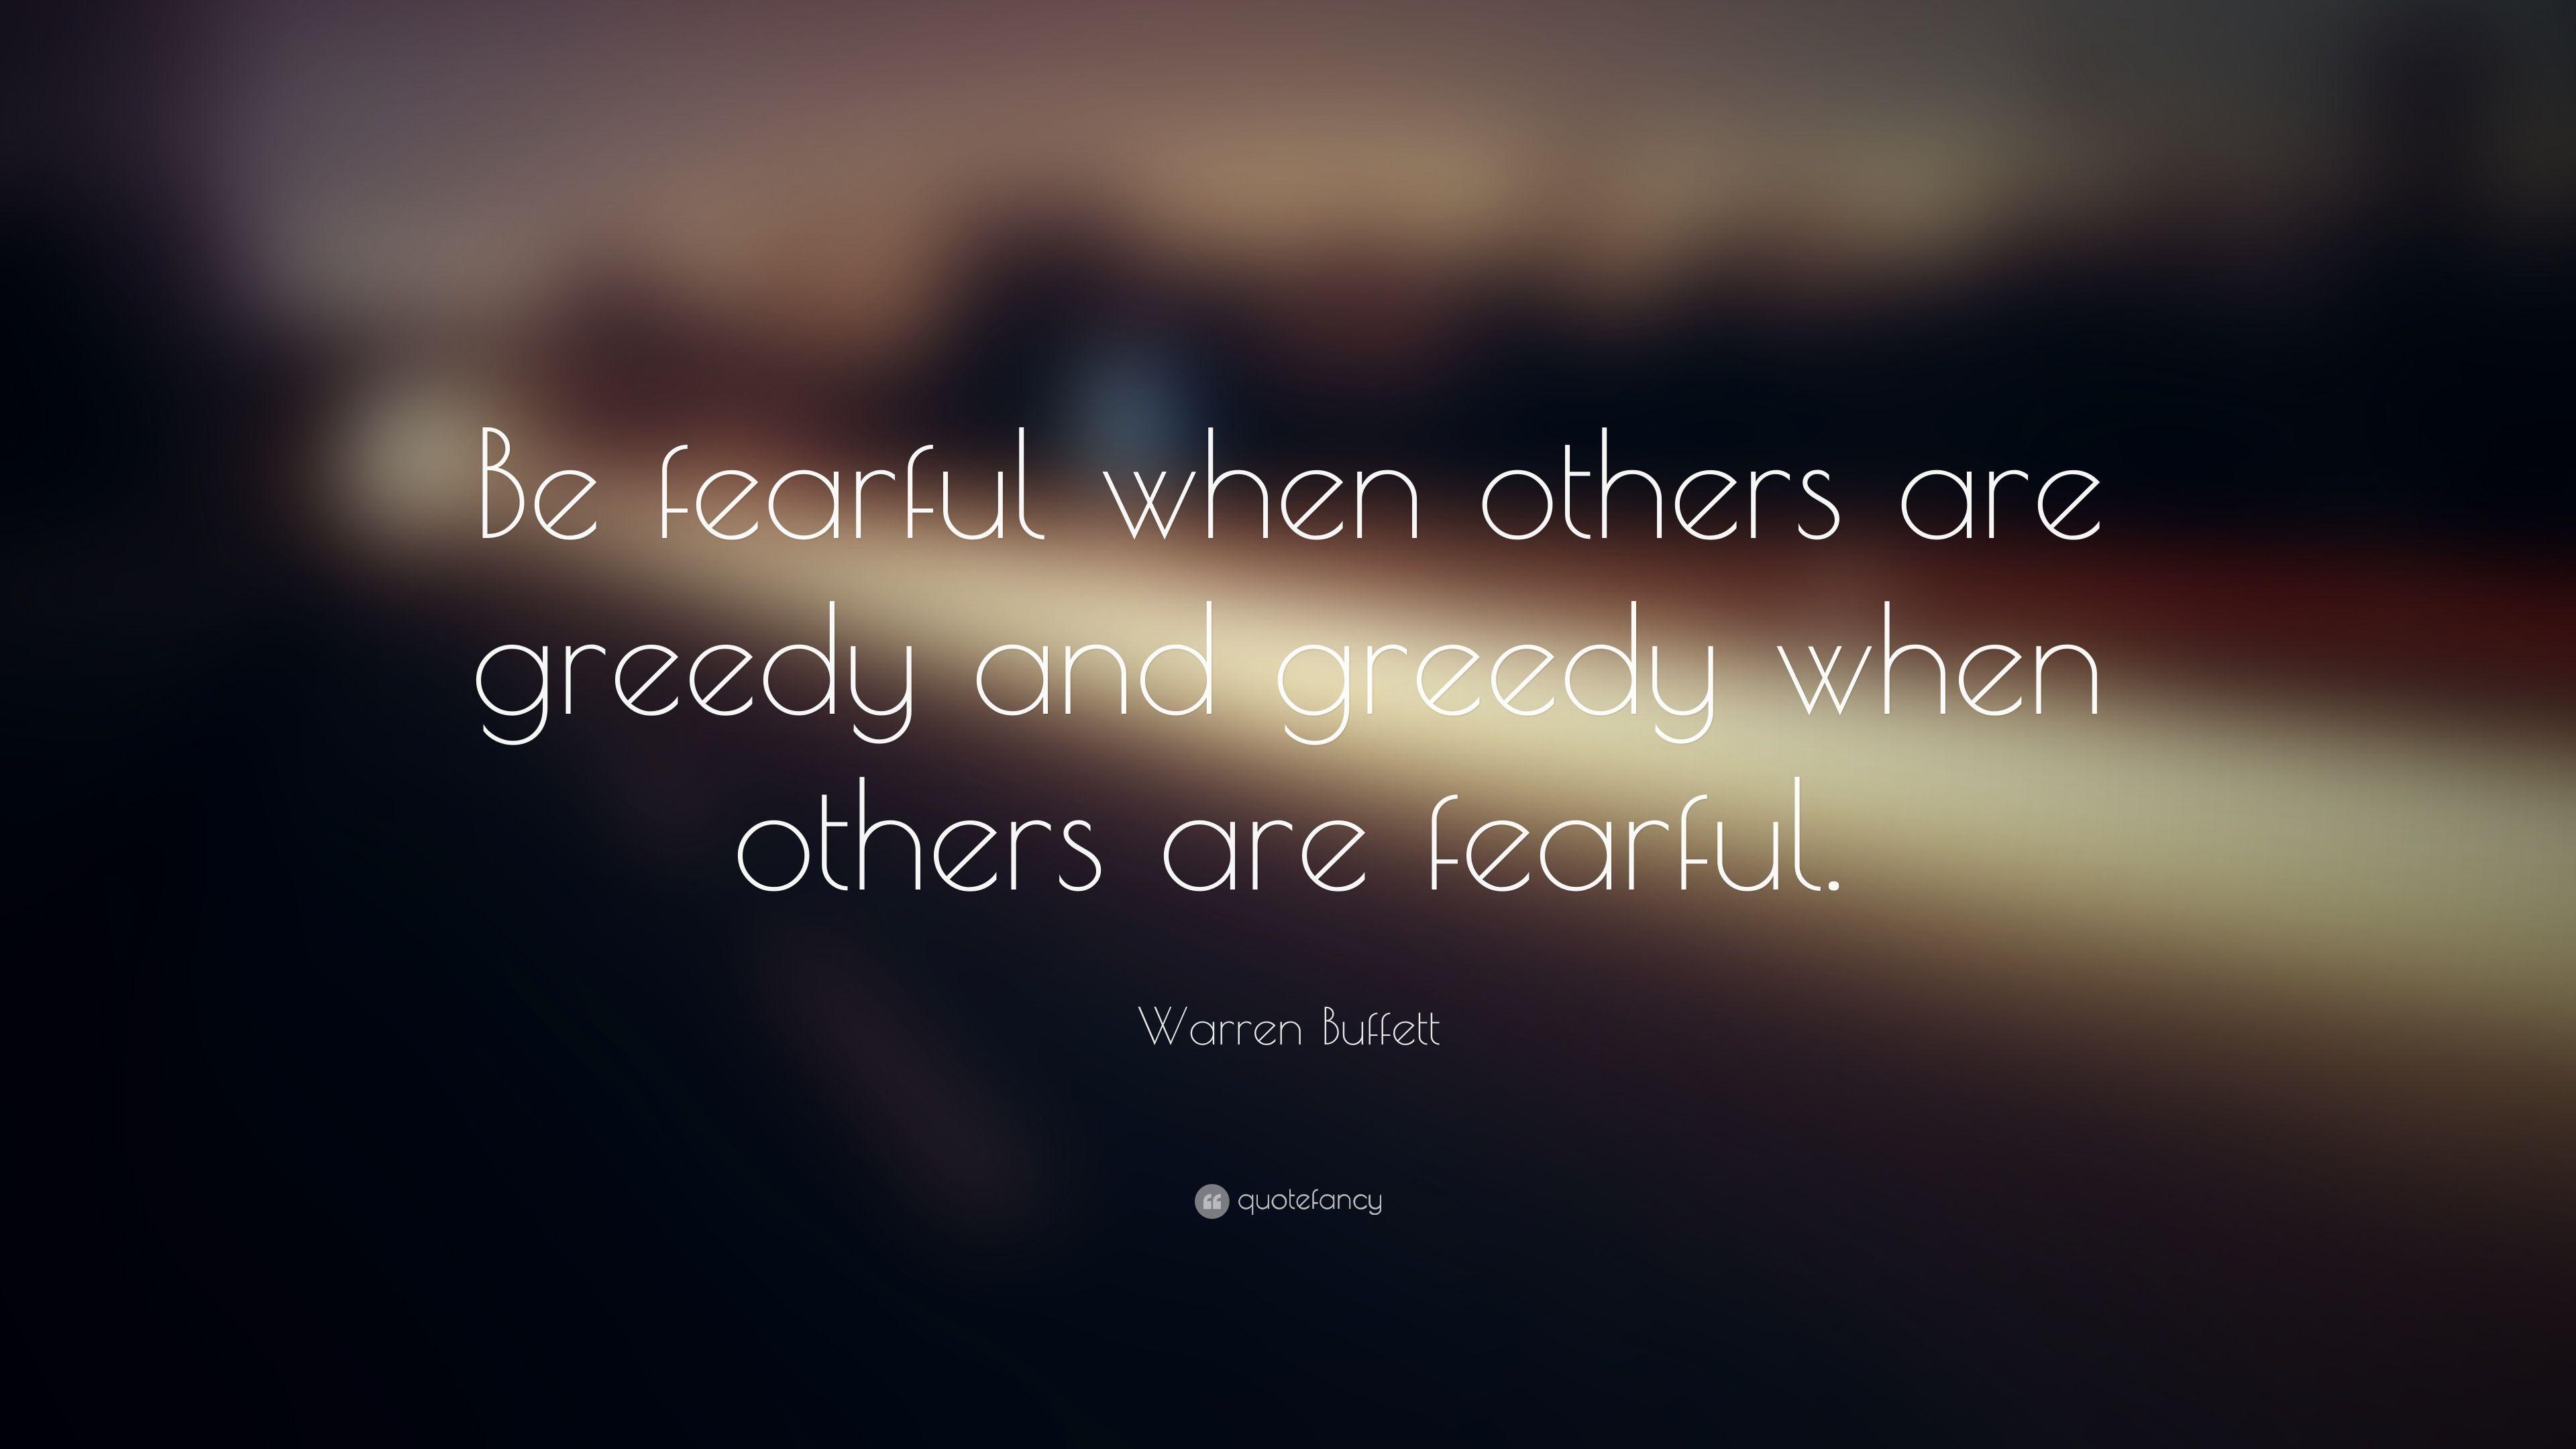 Warren Buffett Quote: “Be fearful when others are greedy